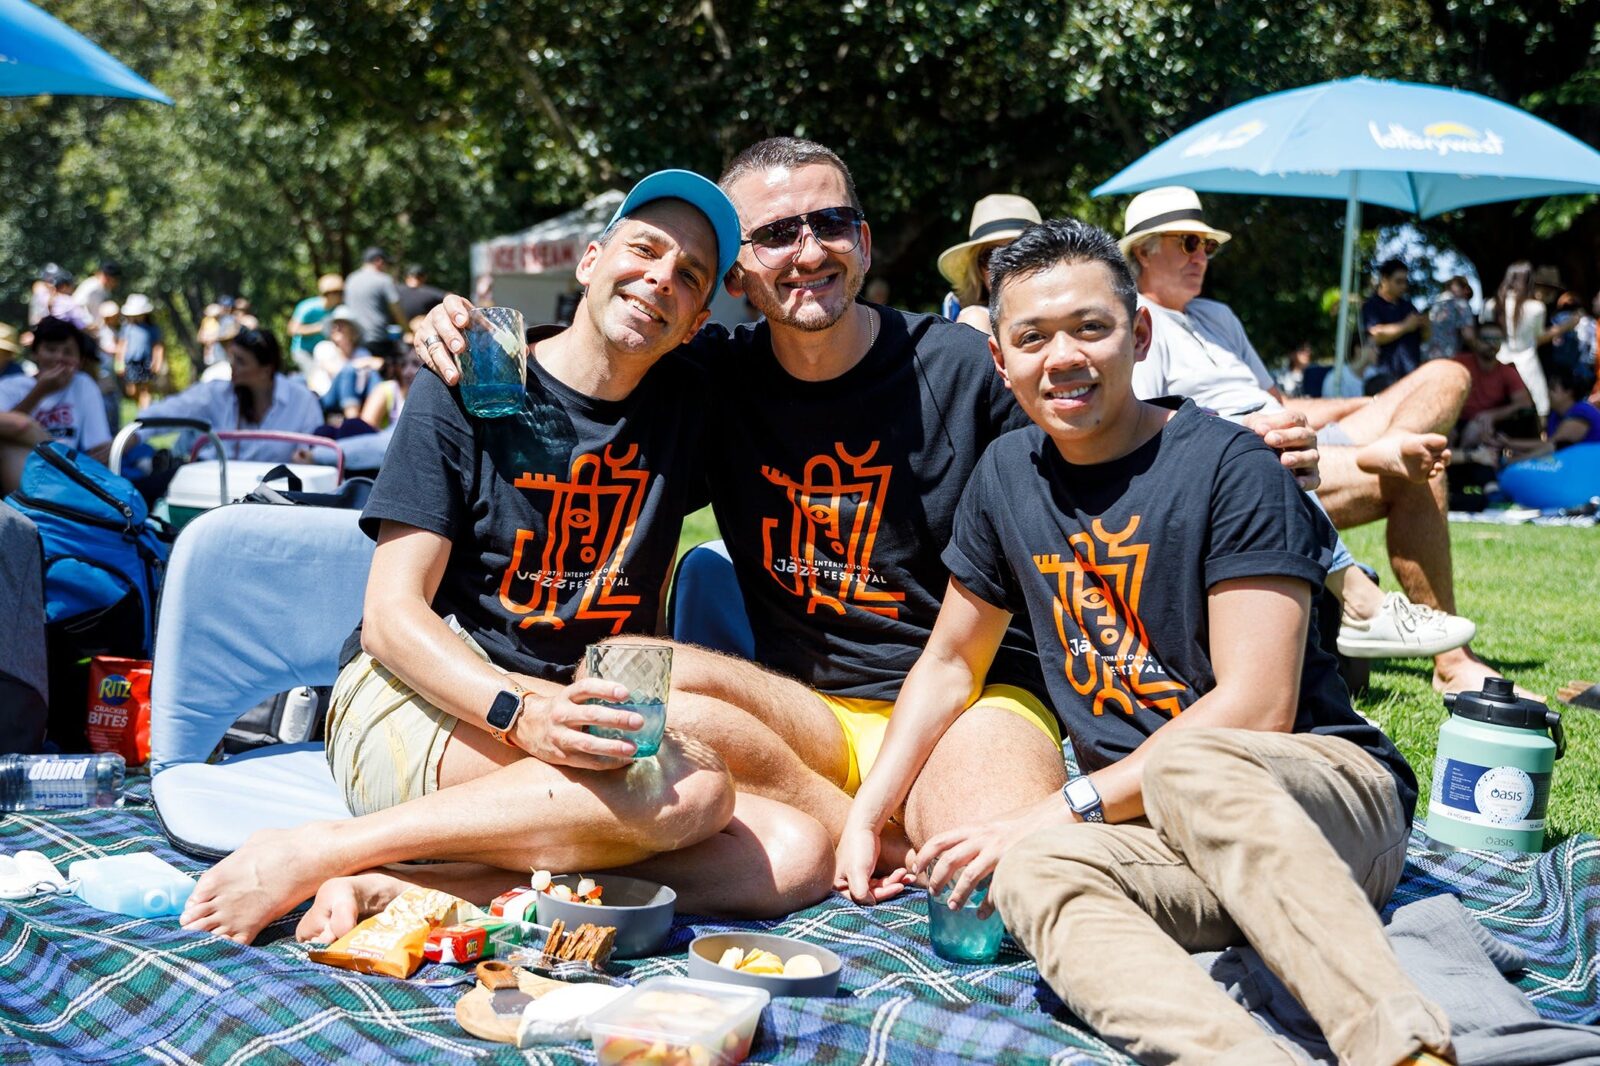 3 audience members enjoying the Jazz Picnic in the Park wearing matching jazz festival t-shirts